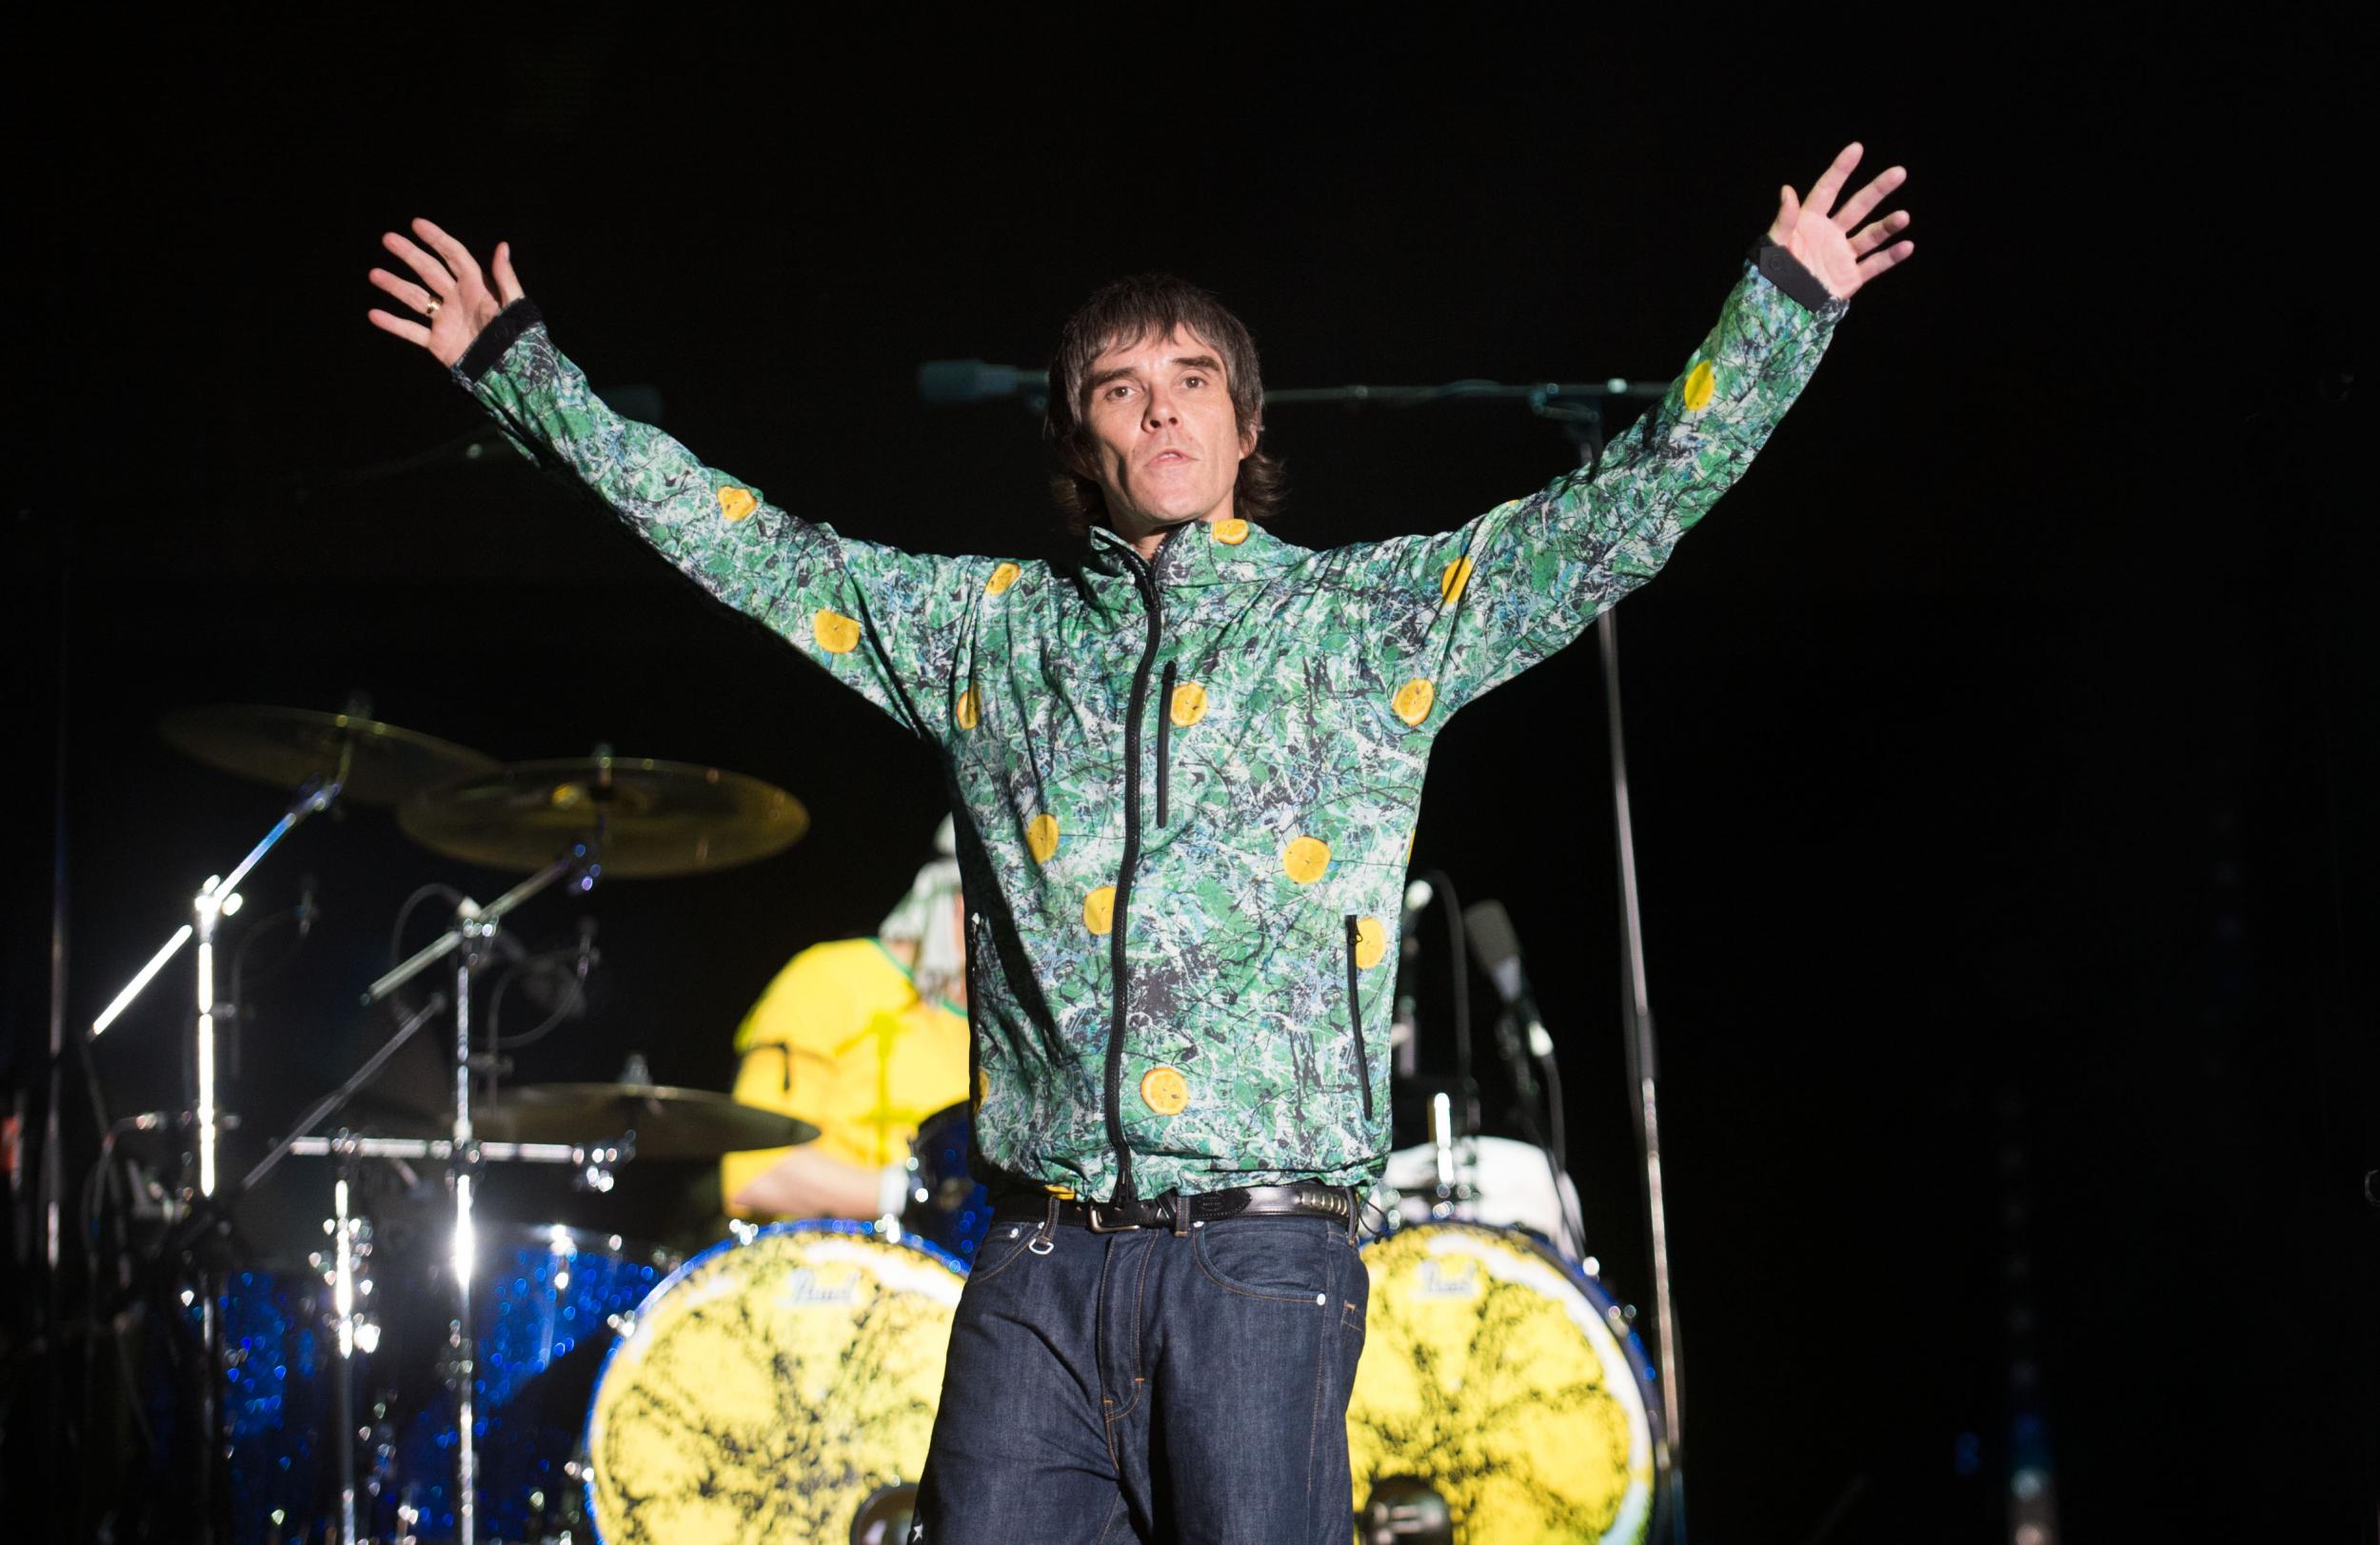 Stone Roses are recording 'glorious' new music, confirms Ian Brown